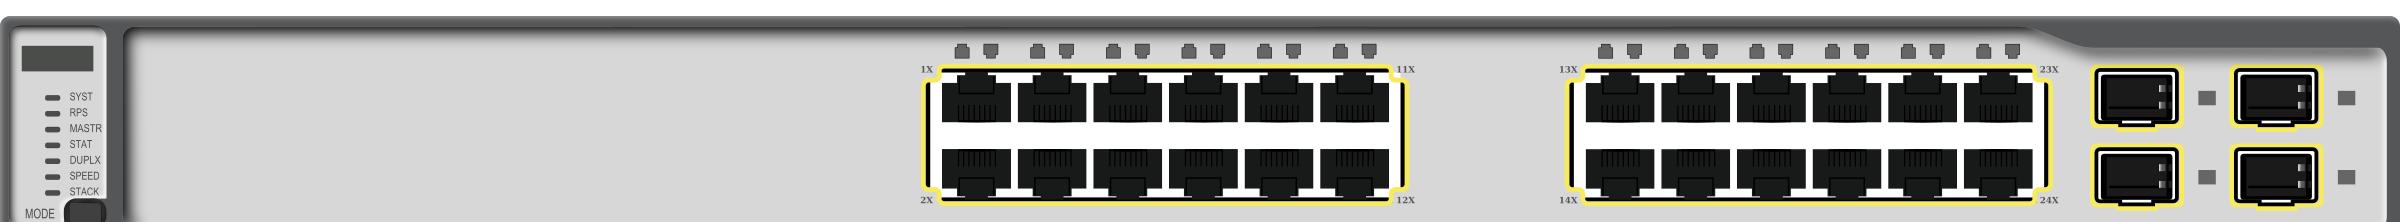 Gigabit Layer 3 Switch #1 PNG icons